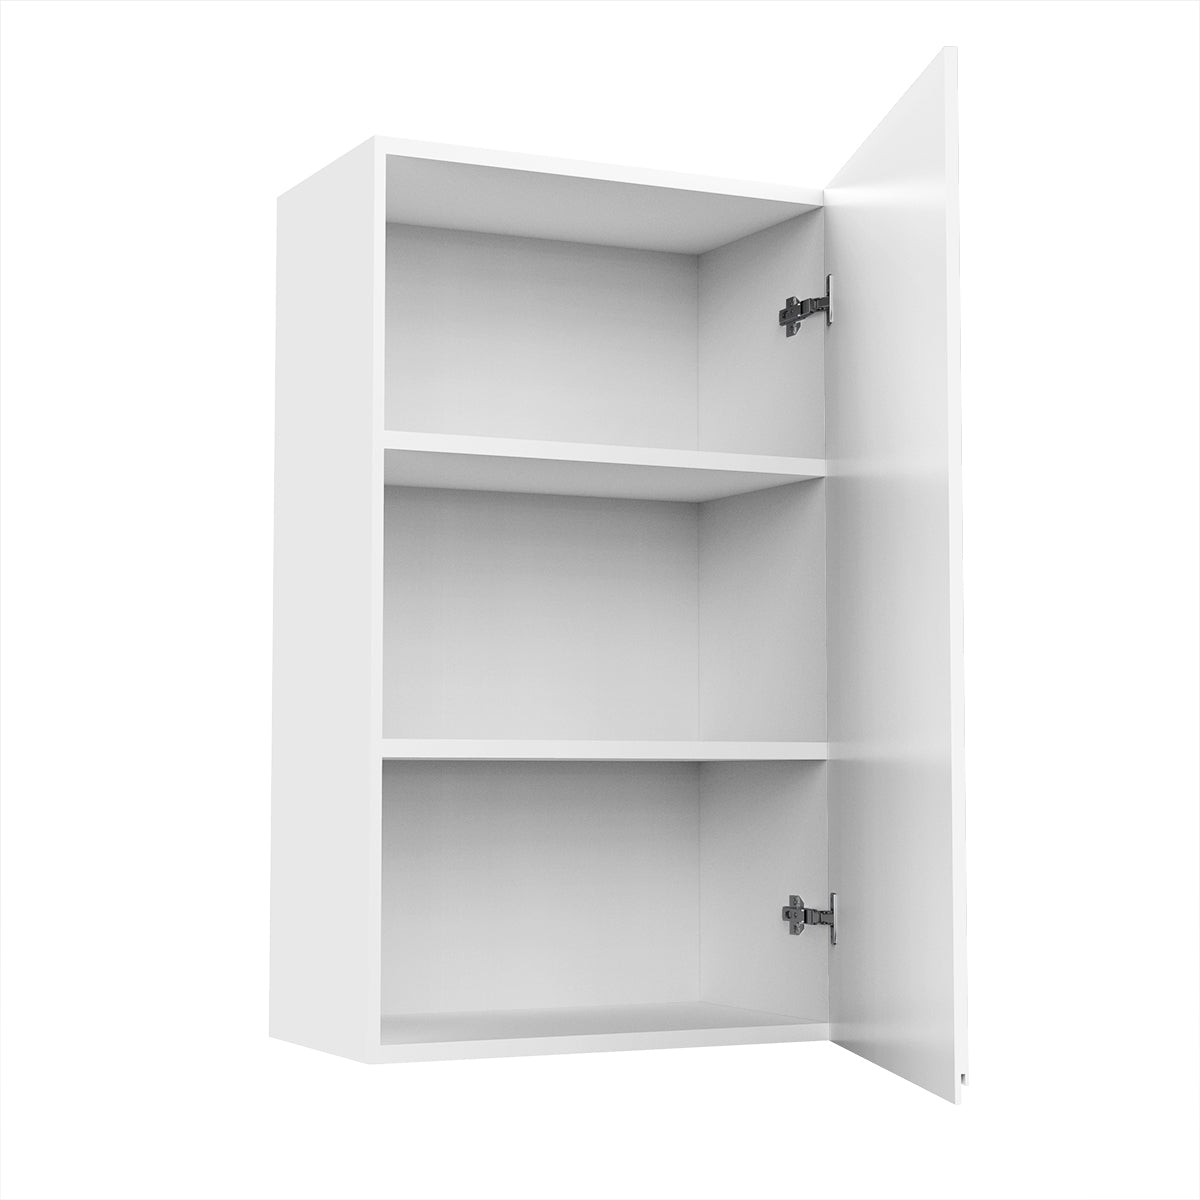 Kitchen Wall Cabinet - RTA - Lacquer white - Single Door Wall Cabinet | 21"W x 36"H x 12"D